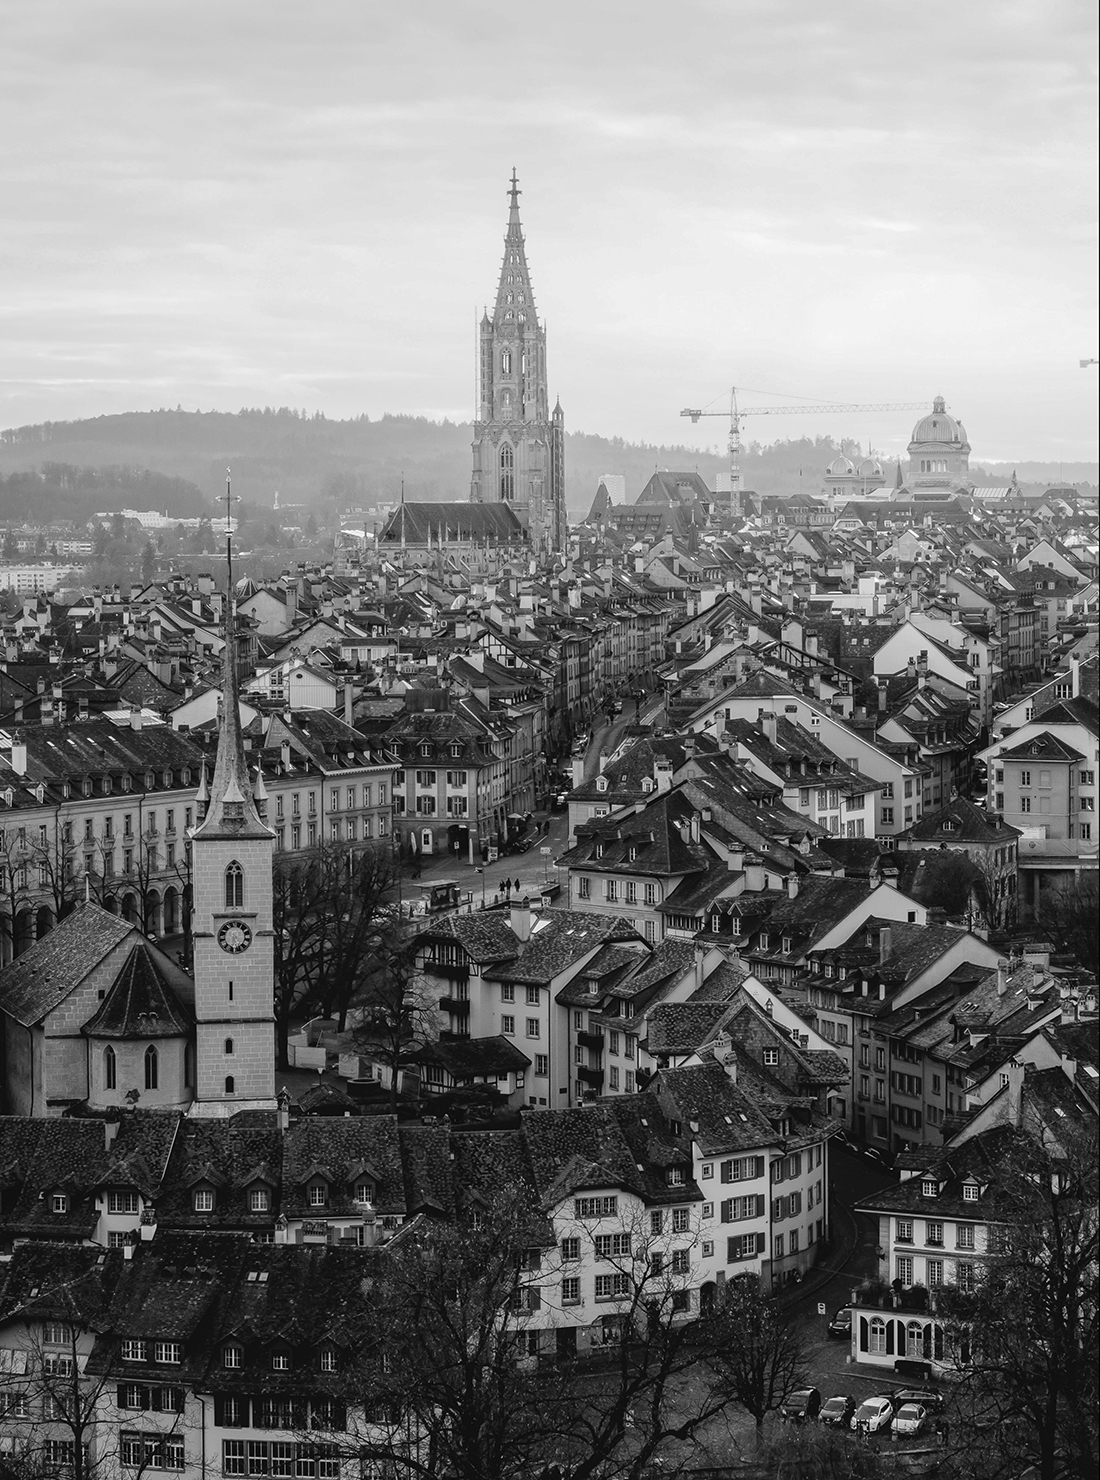 190902-SSD-Immobilien-GmbH-Bern-City-Muenster-Black-and-White-1100×1480